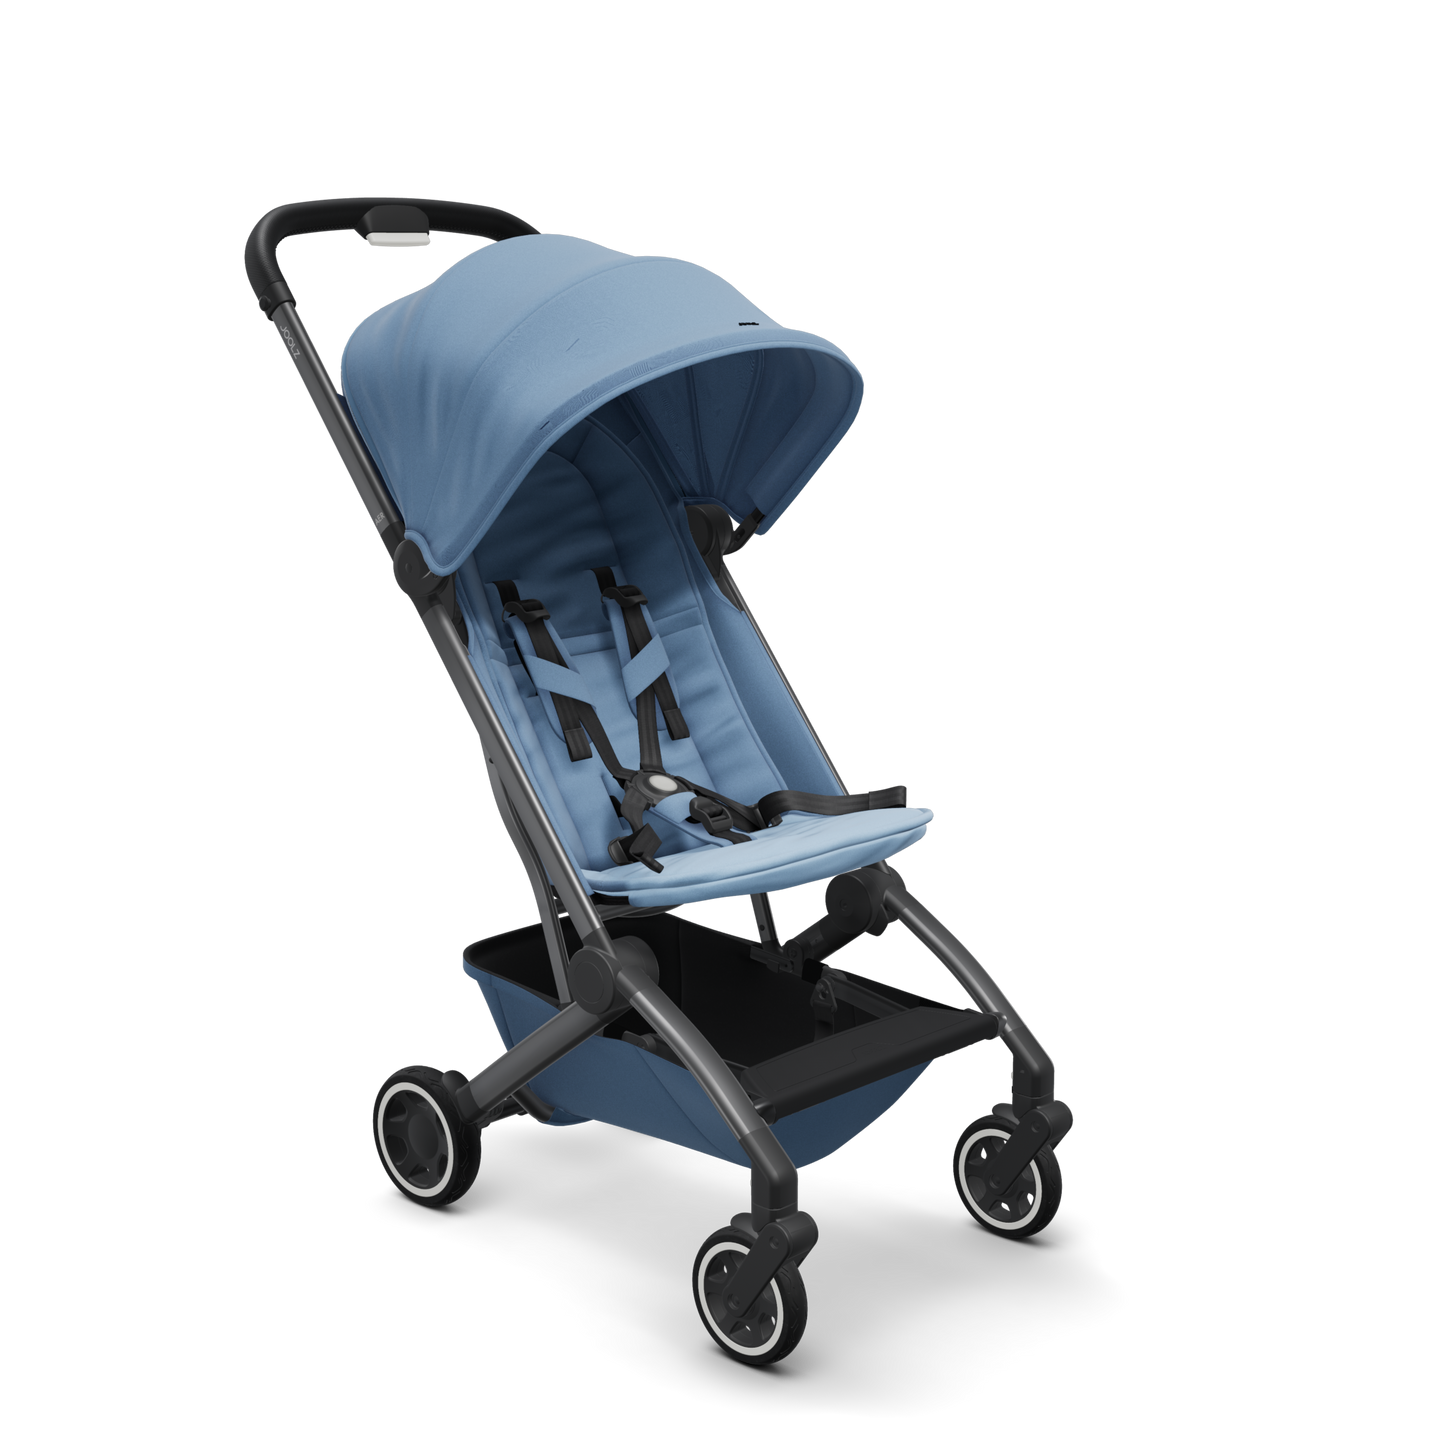 Select the Joolz Aer stroller featured by Mega babies in a splendid blue shade.